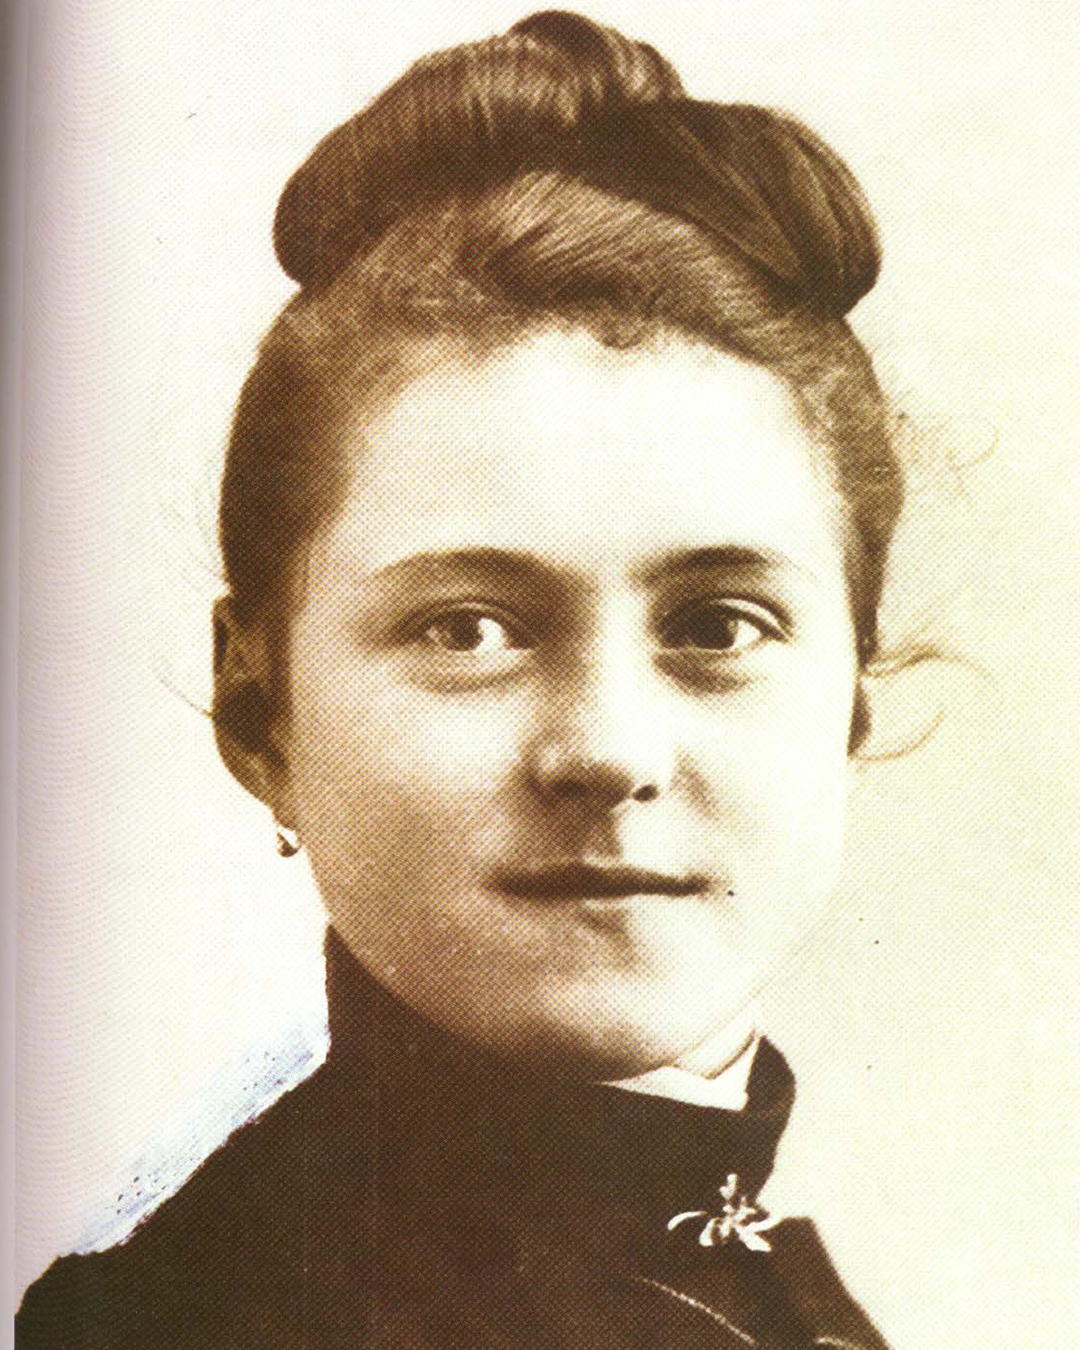 St. Therese prior to her entry into the Carmelite Sisters.